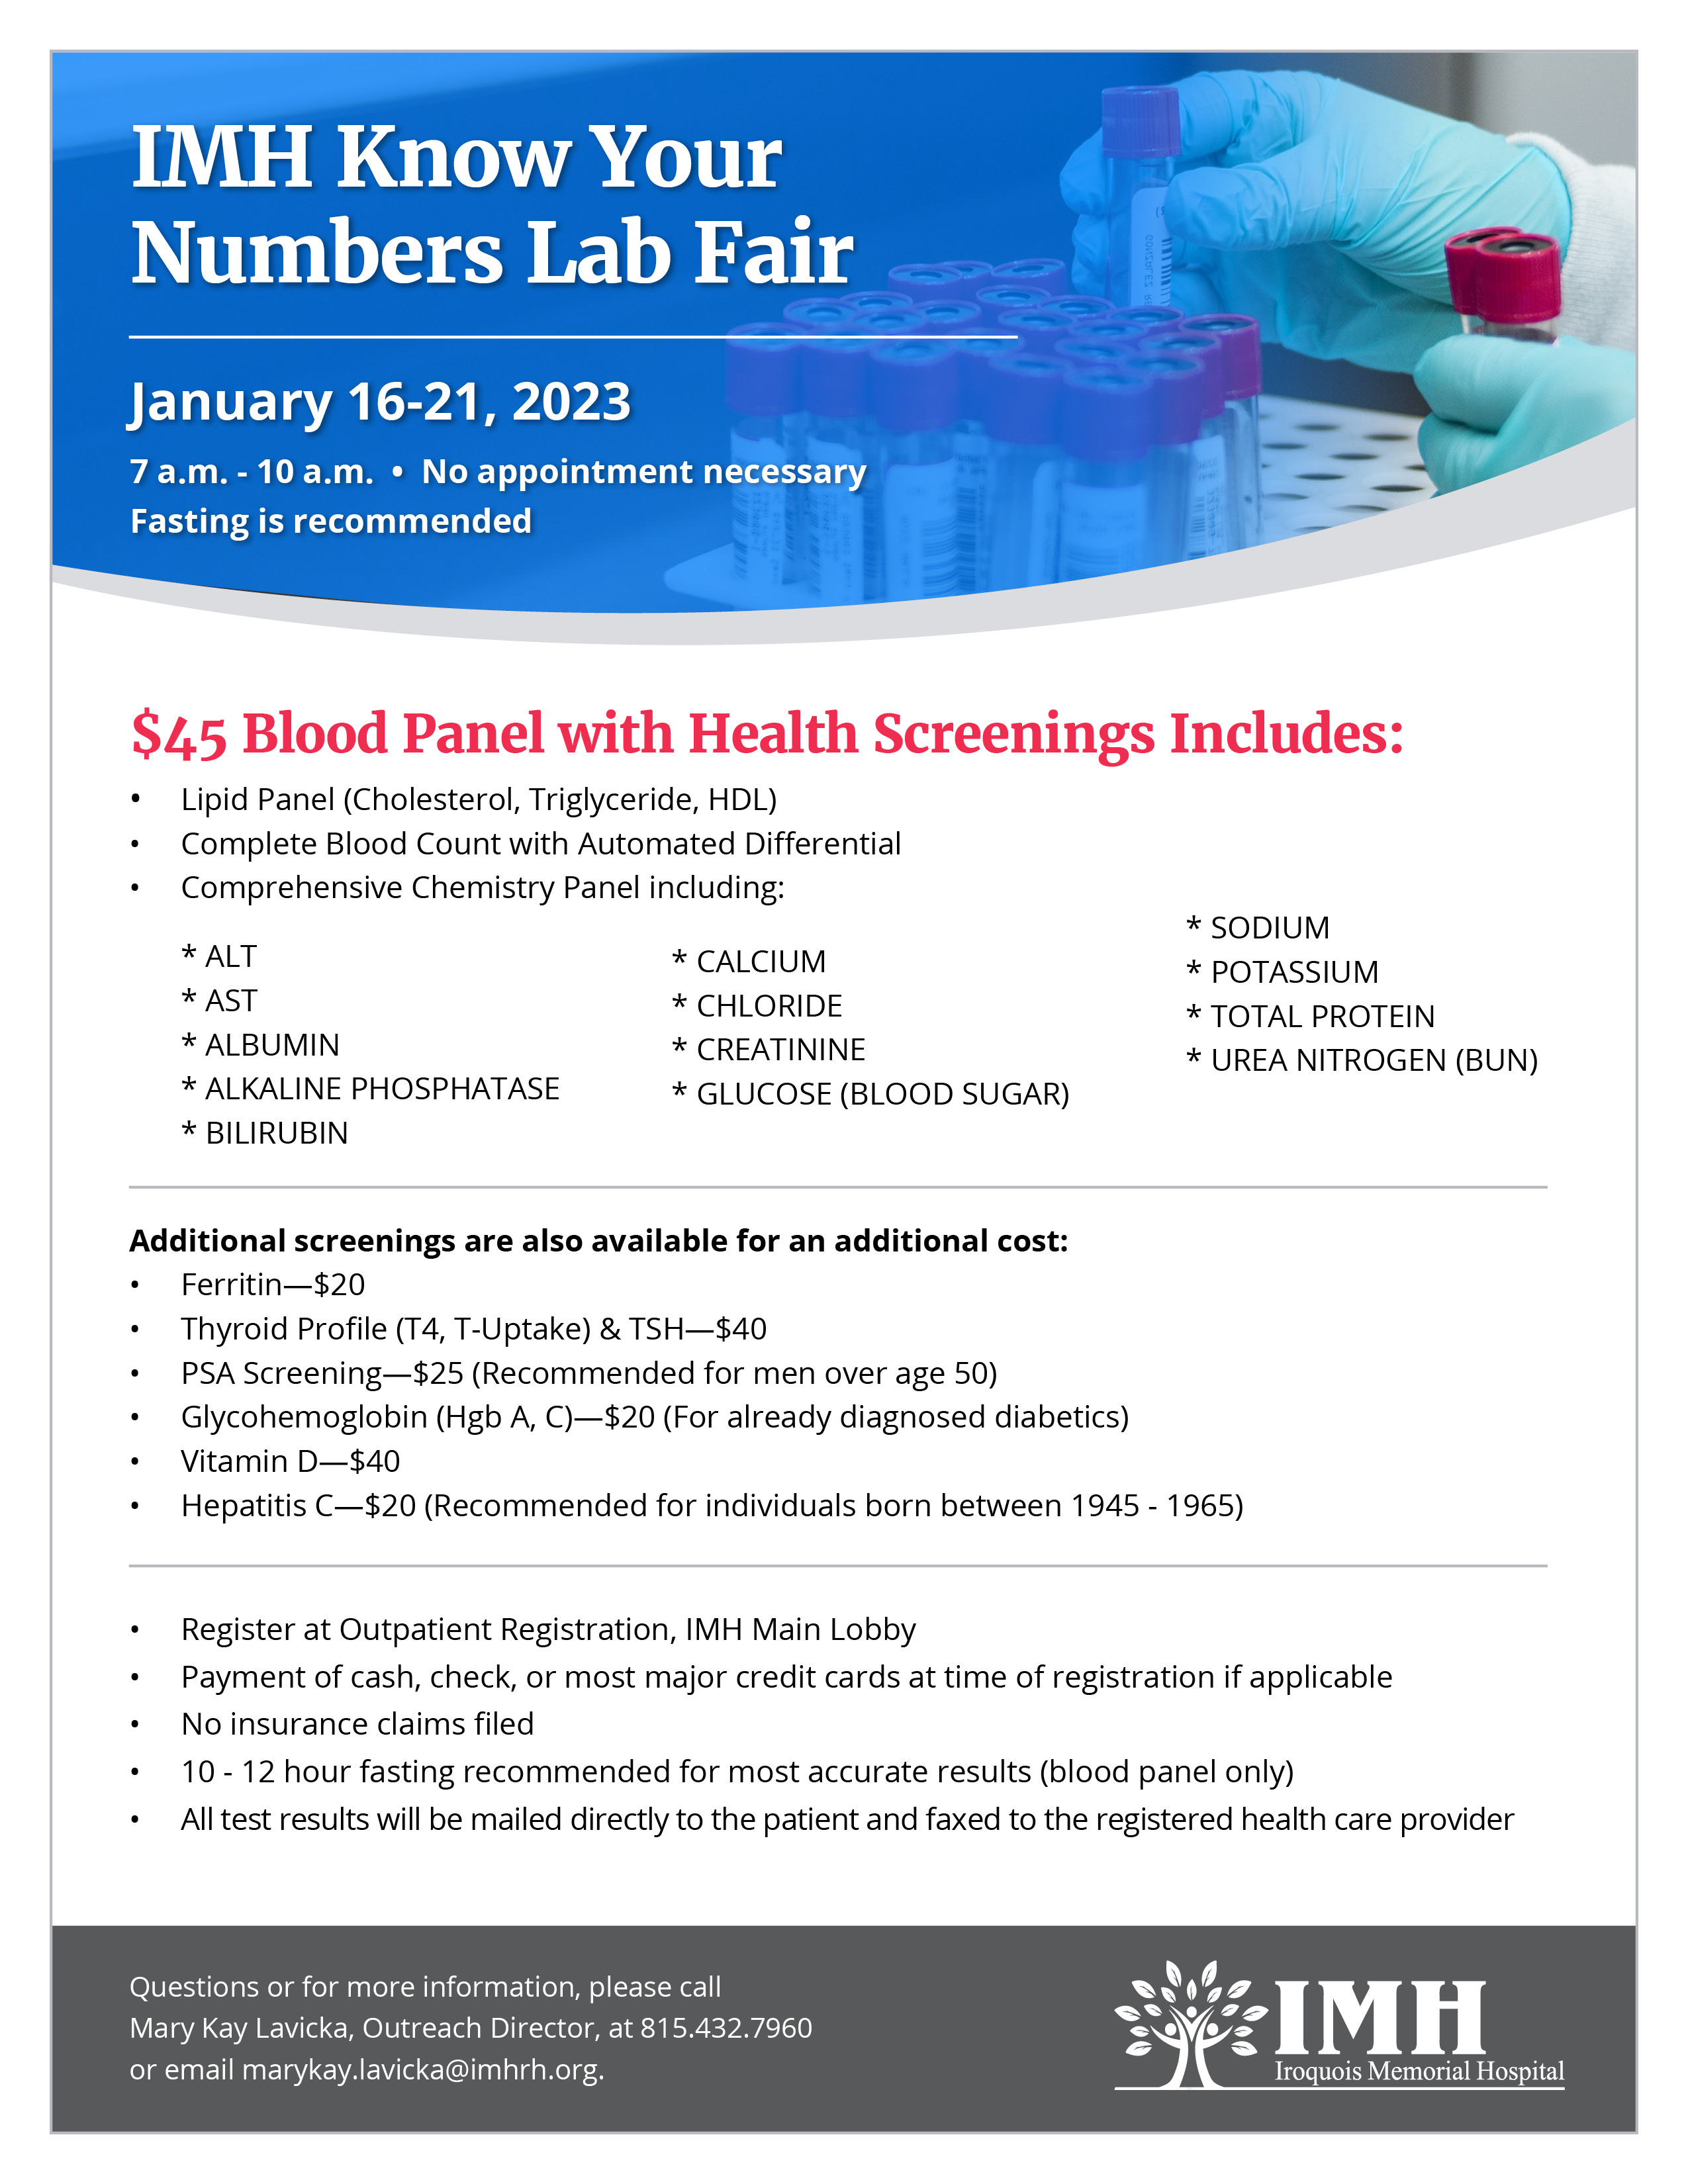 $45 Know Your Numbers Lab Fair